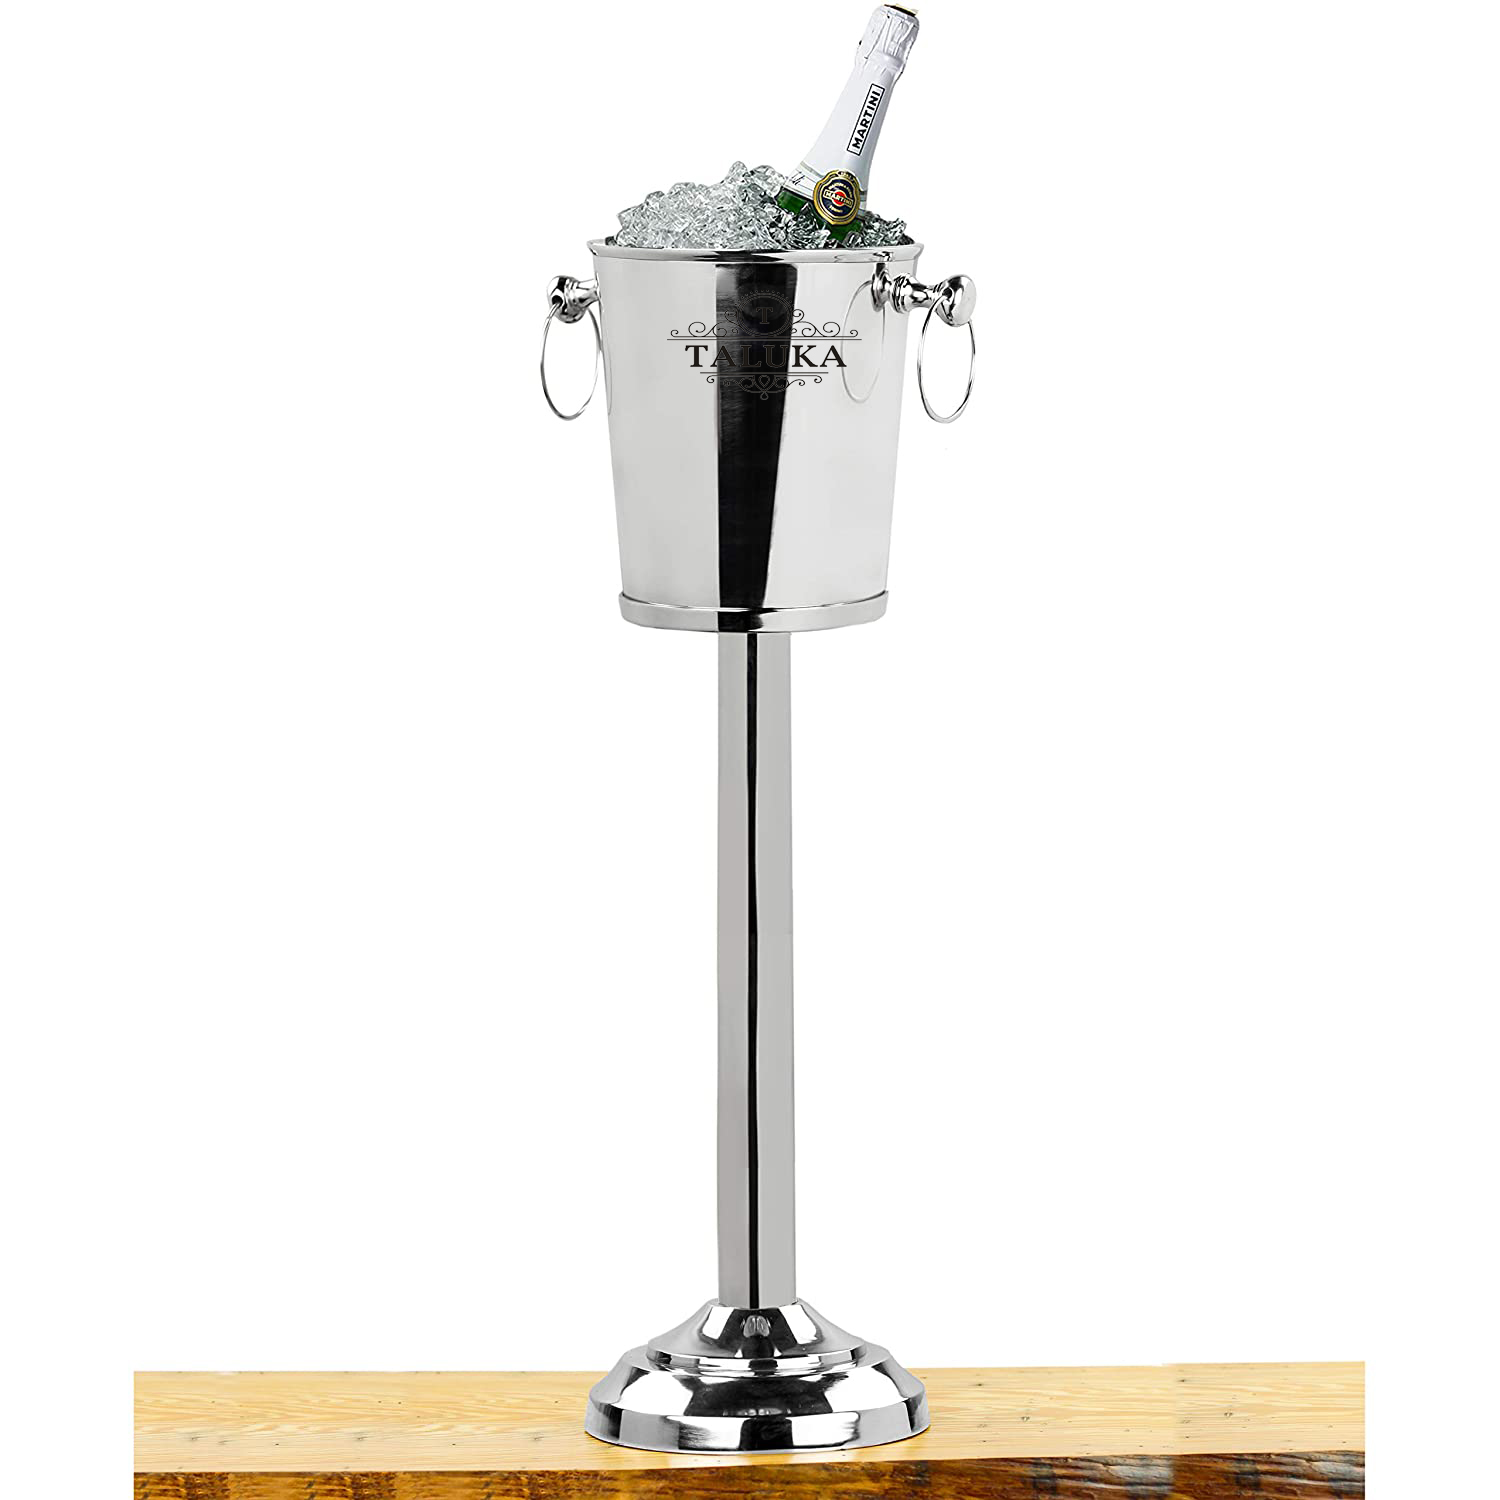 Taluka Plain Nickel Plated Premium Aluminum Free Standing Wine Chiller | Wine Coolers & Cellar with Ice Bucket | Kitchen & Bar Wares